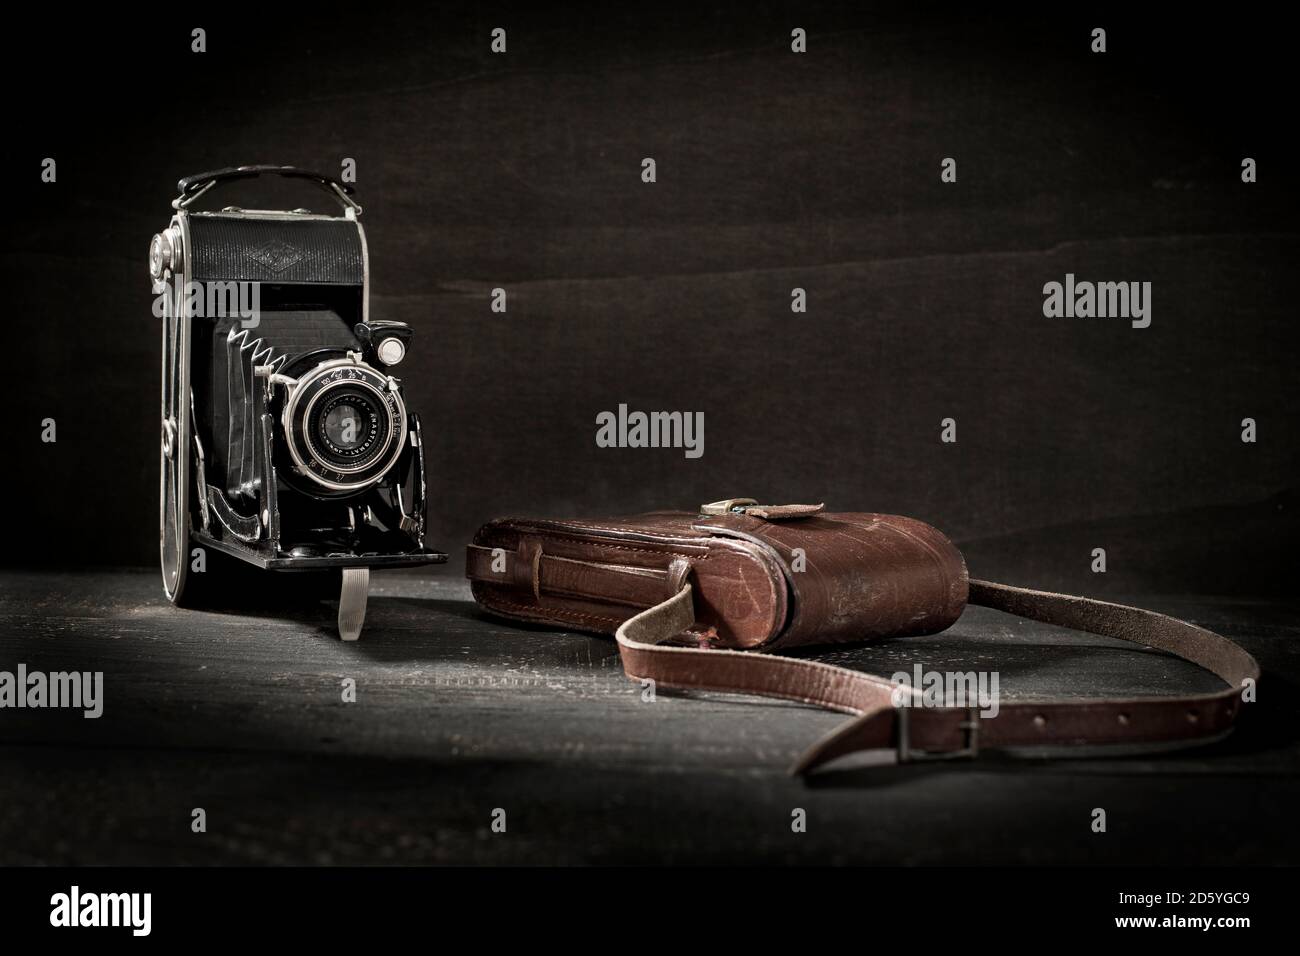 Old camera and leather bag Stock Photo